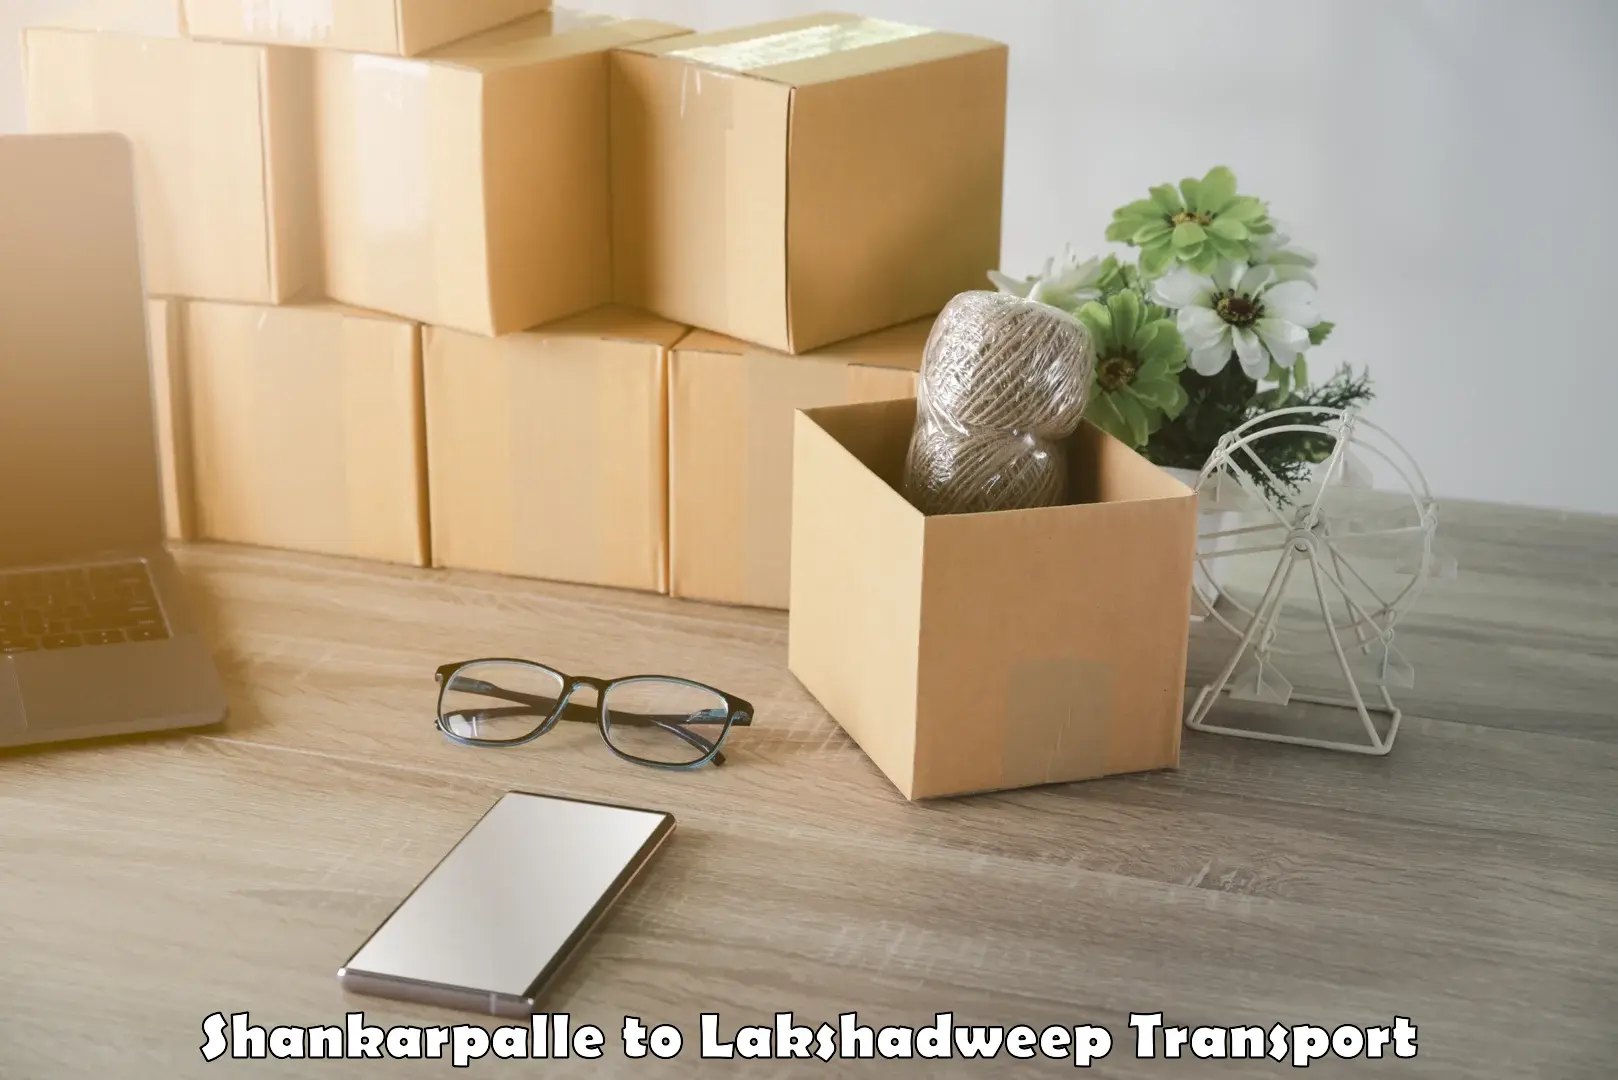 Nearby transport service Shankarpalle to Lakshadweep